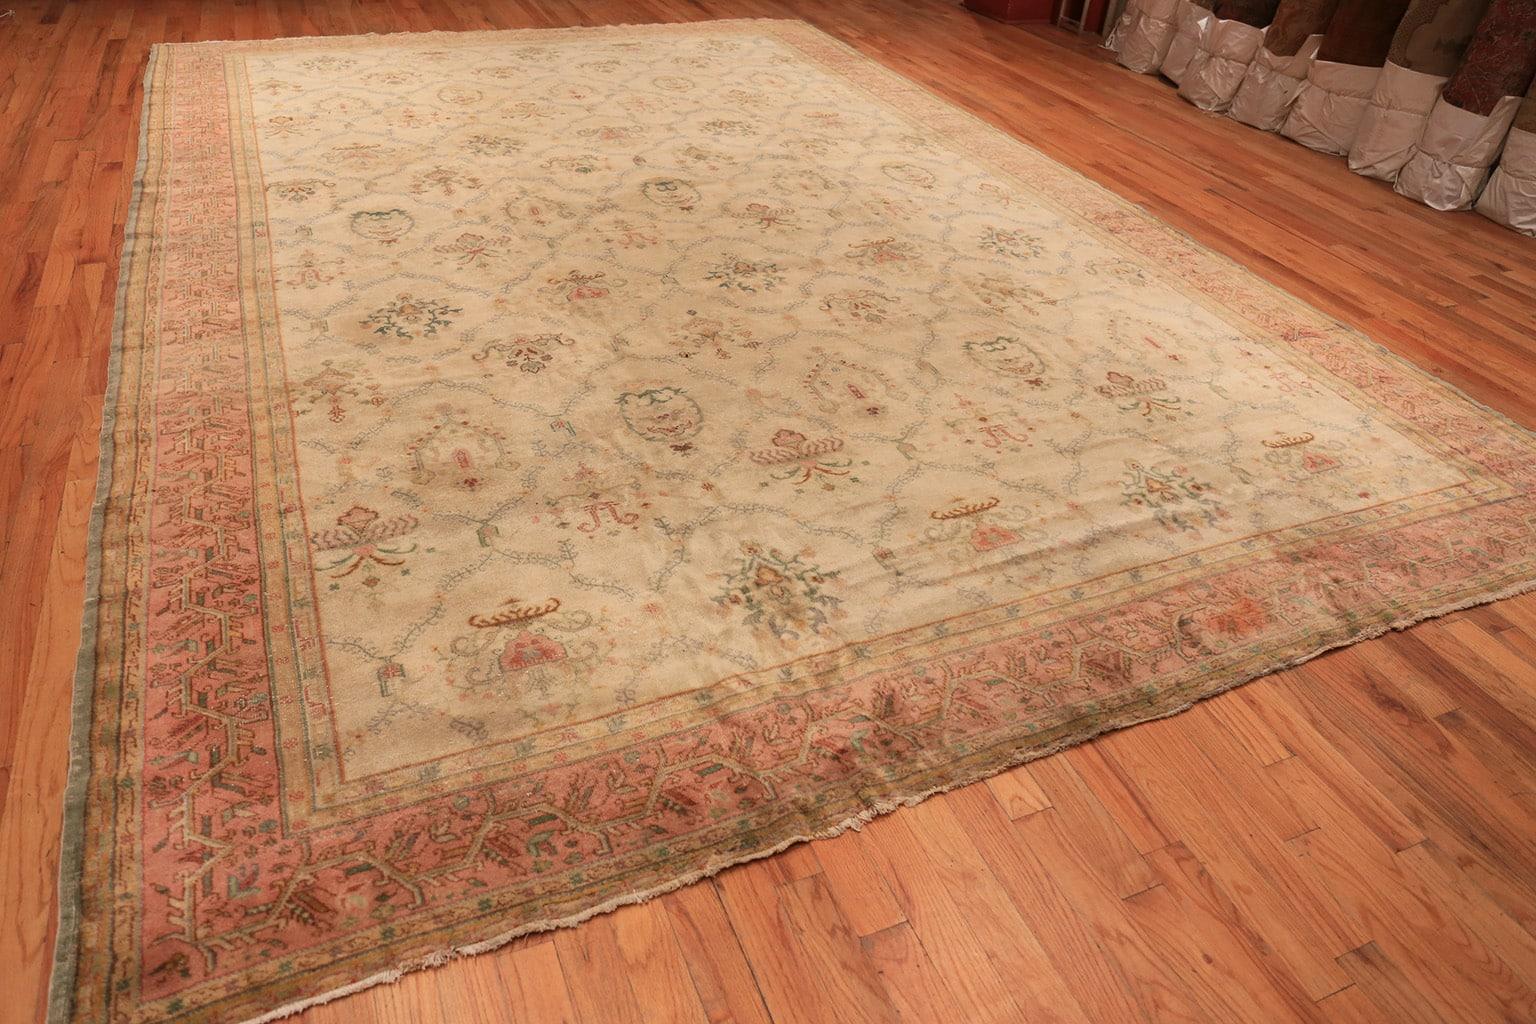 Vintage Sivas carpet, origin: Turkey, circa mid-20th century - Size: 11 ft 9 in x 17 ft 3 in (3.58 m x 5.26 m). 

A rich, grapefruit pink border surrounds the Sivas carpet, its interior containing a pleasantly curling vine that establishes an almost